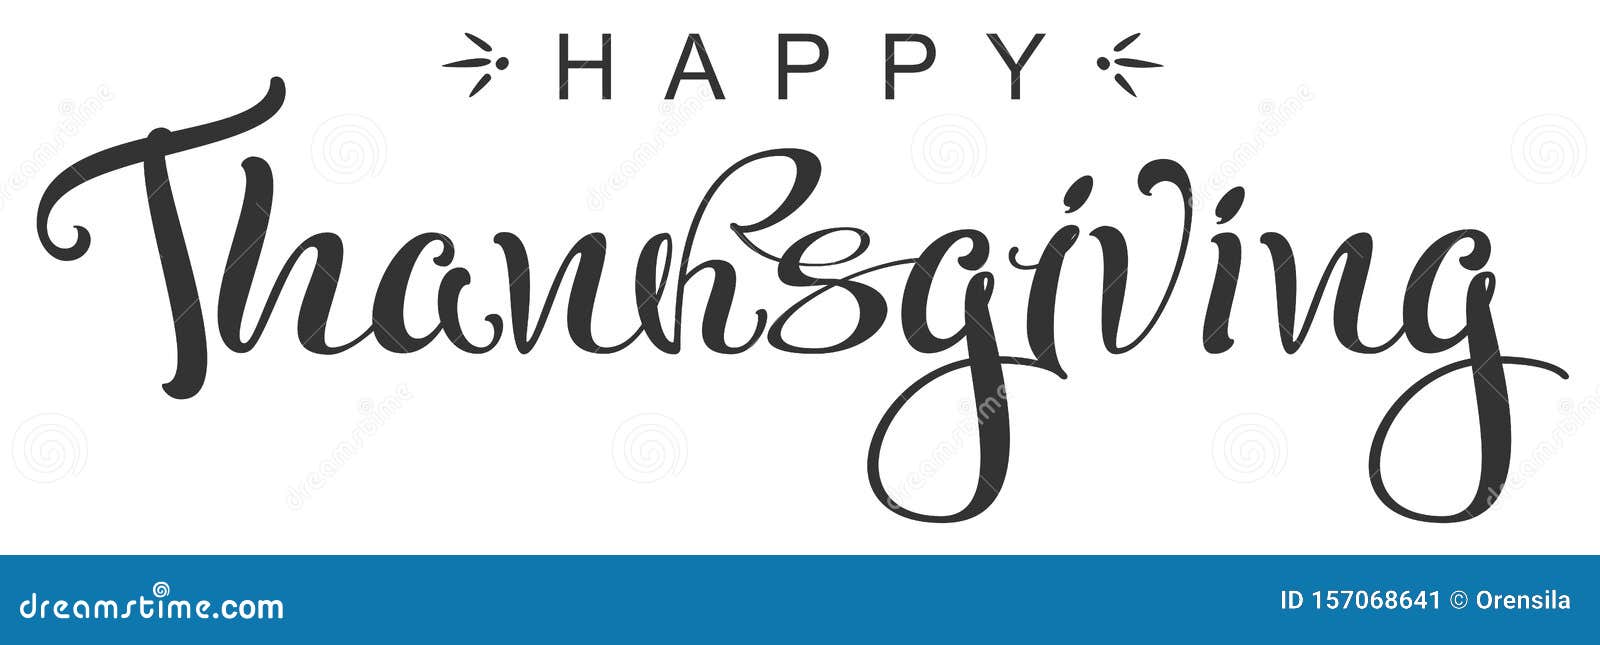 Happy Thanksgiving Calligraphy Lettering Text Greeting Card Stock ...